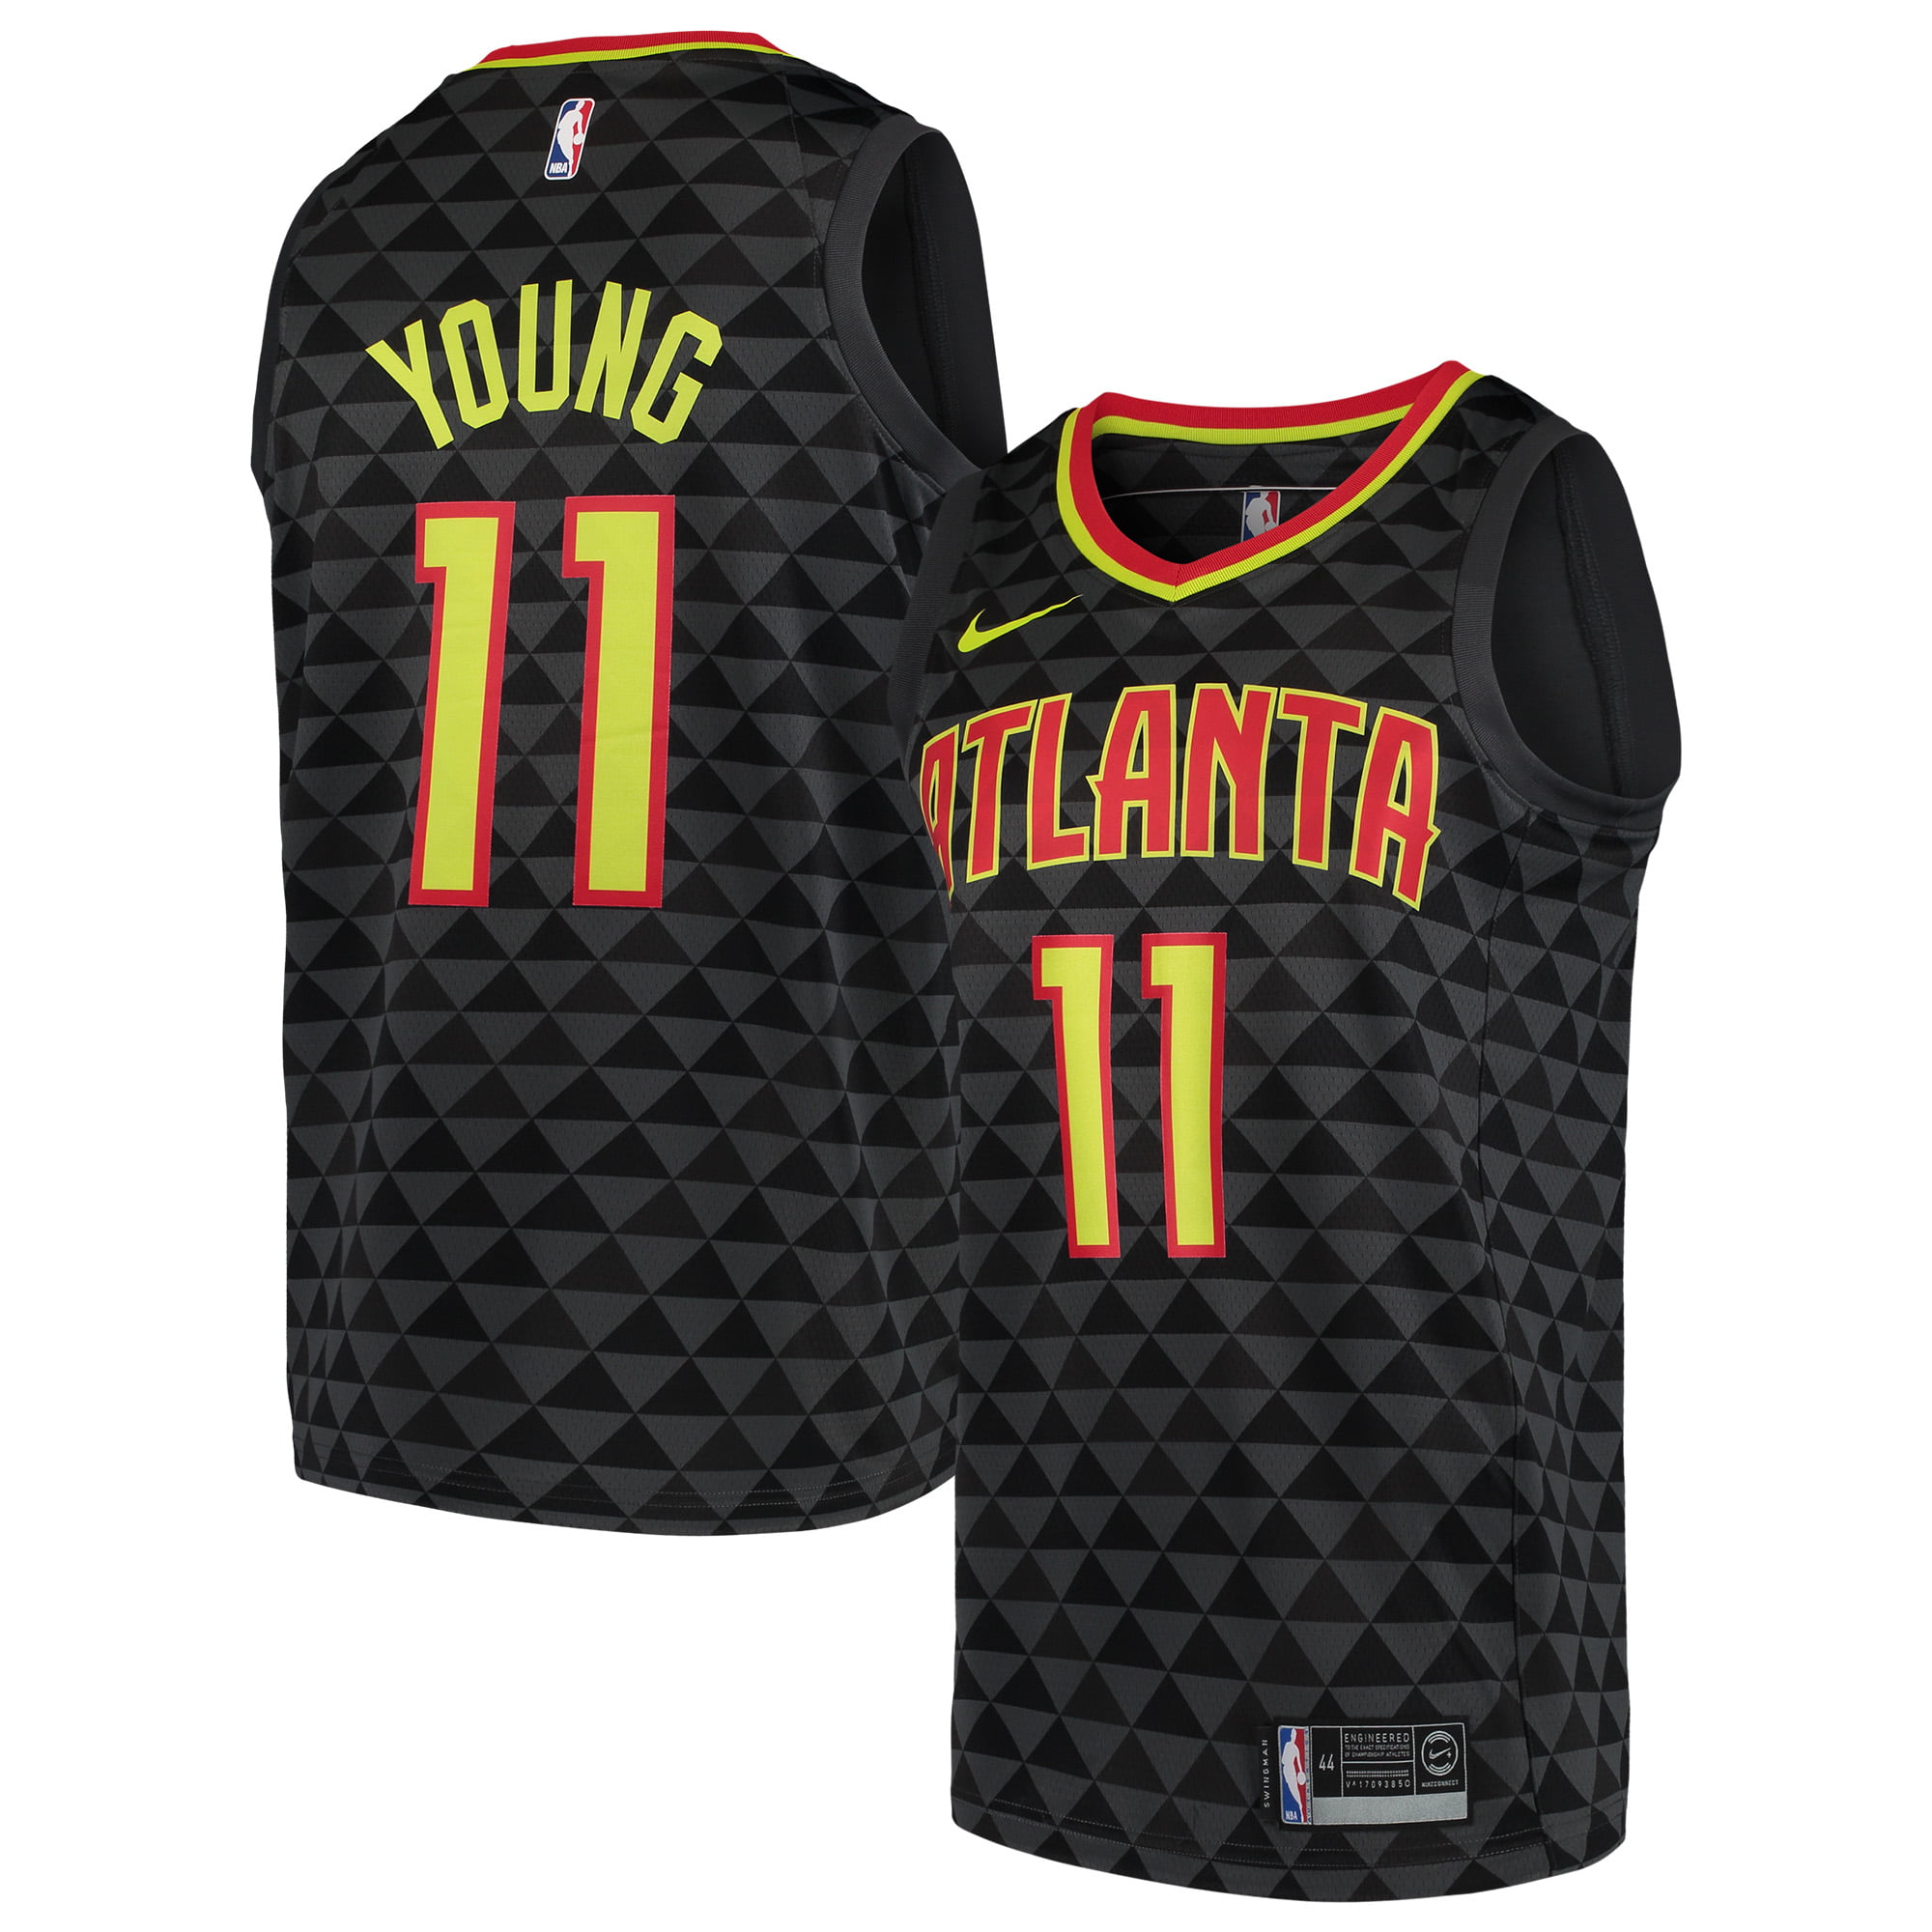 trae young jersey blue